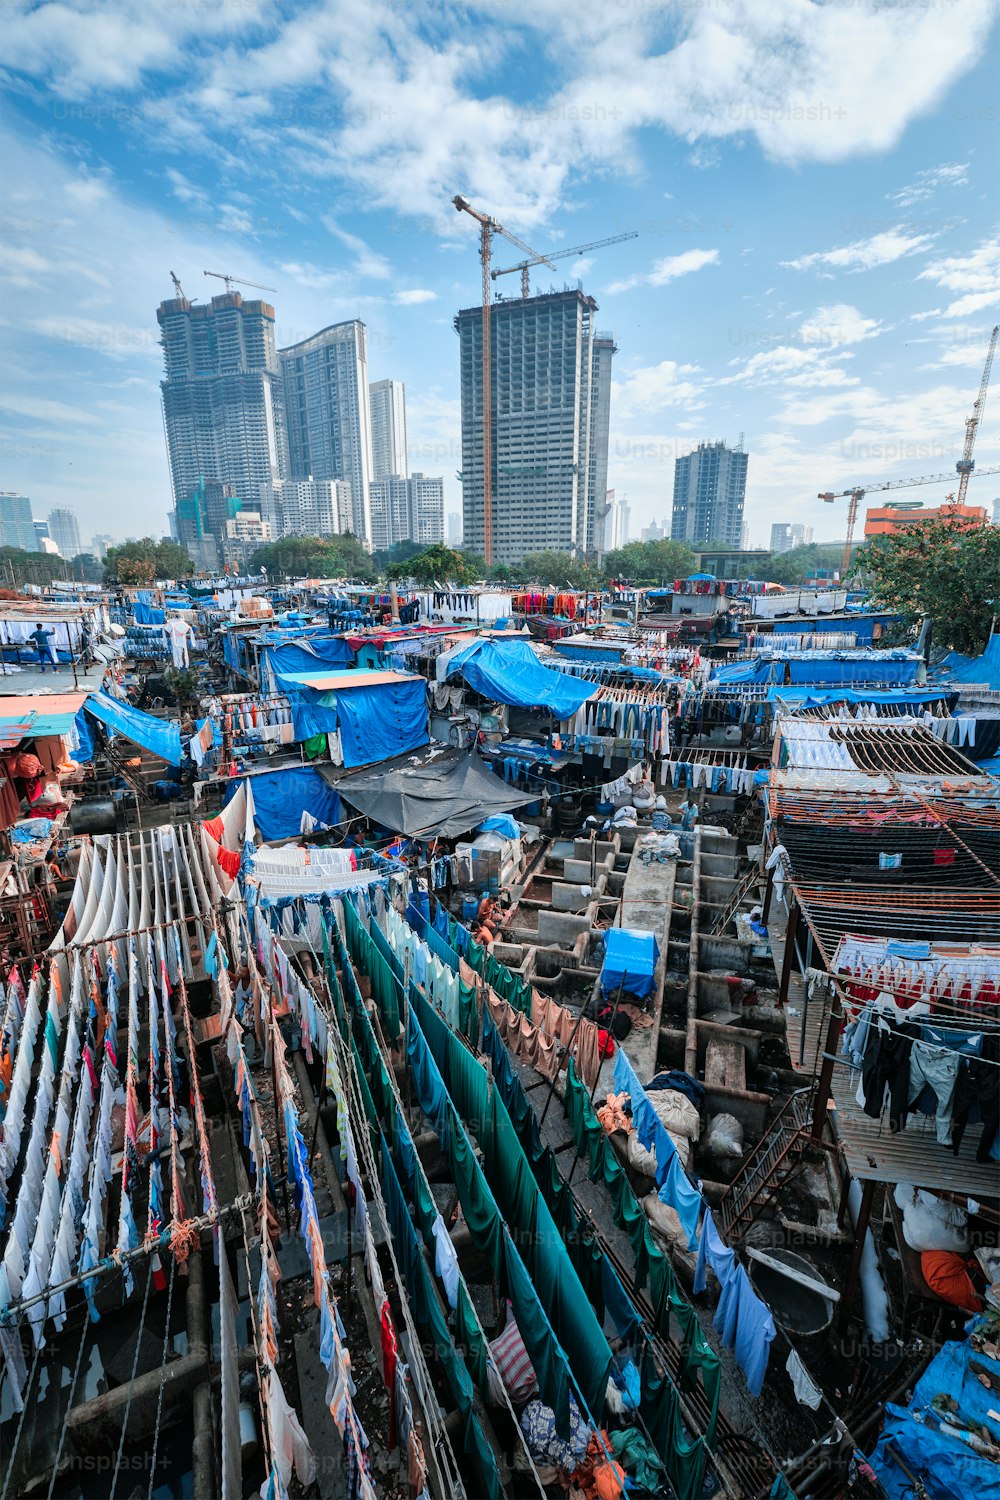 View of Dhobi Ghat (Mahalaxmi Dhobi Ghat) is world largest open air laundromat (lavoir) in Mumbai, India with laundry drying on ropes. Now one of signature landmarks and tourist attractions of Mumbai